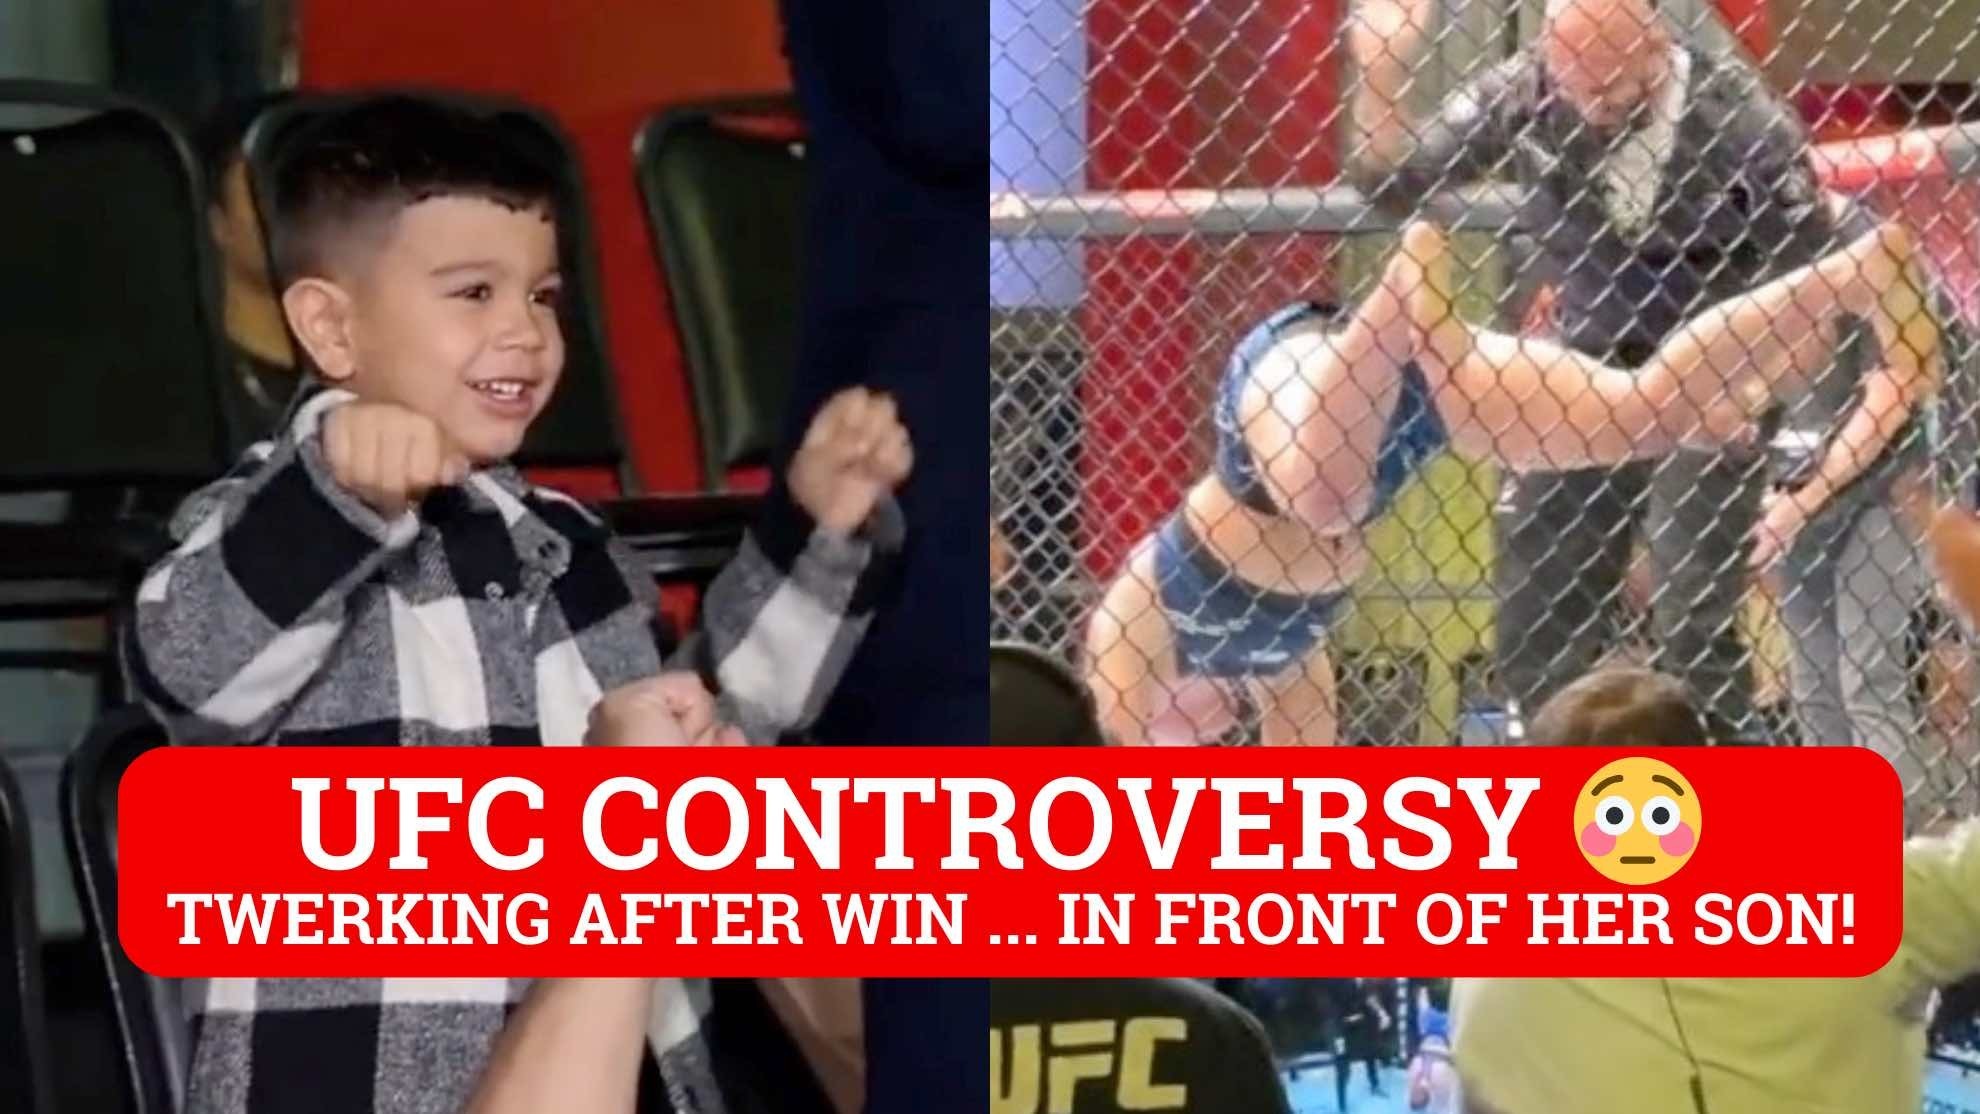 UFC controversy: Ailin Perez twerks after win while her son watches